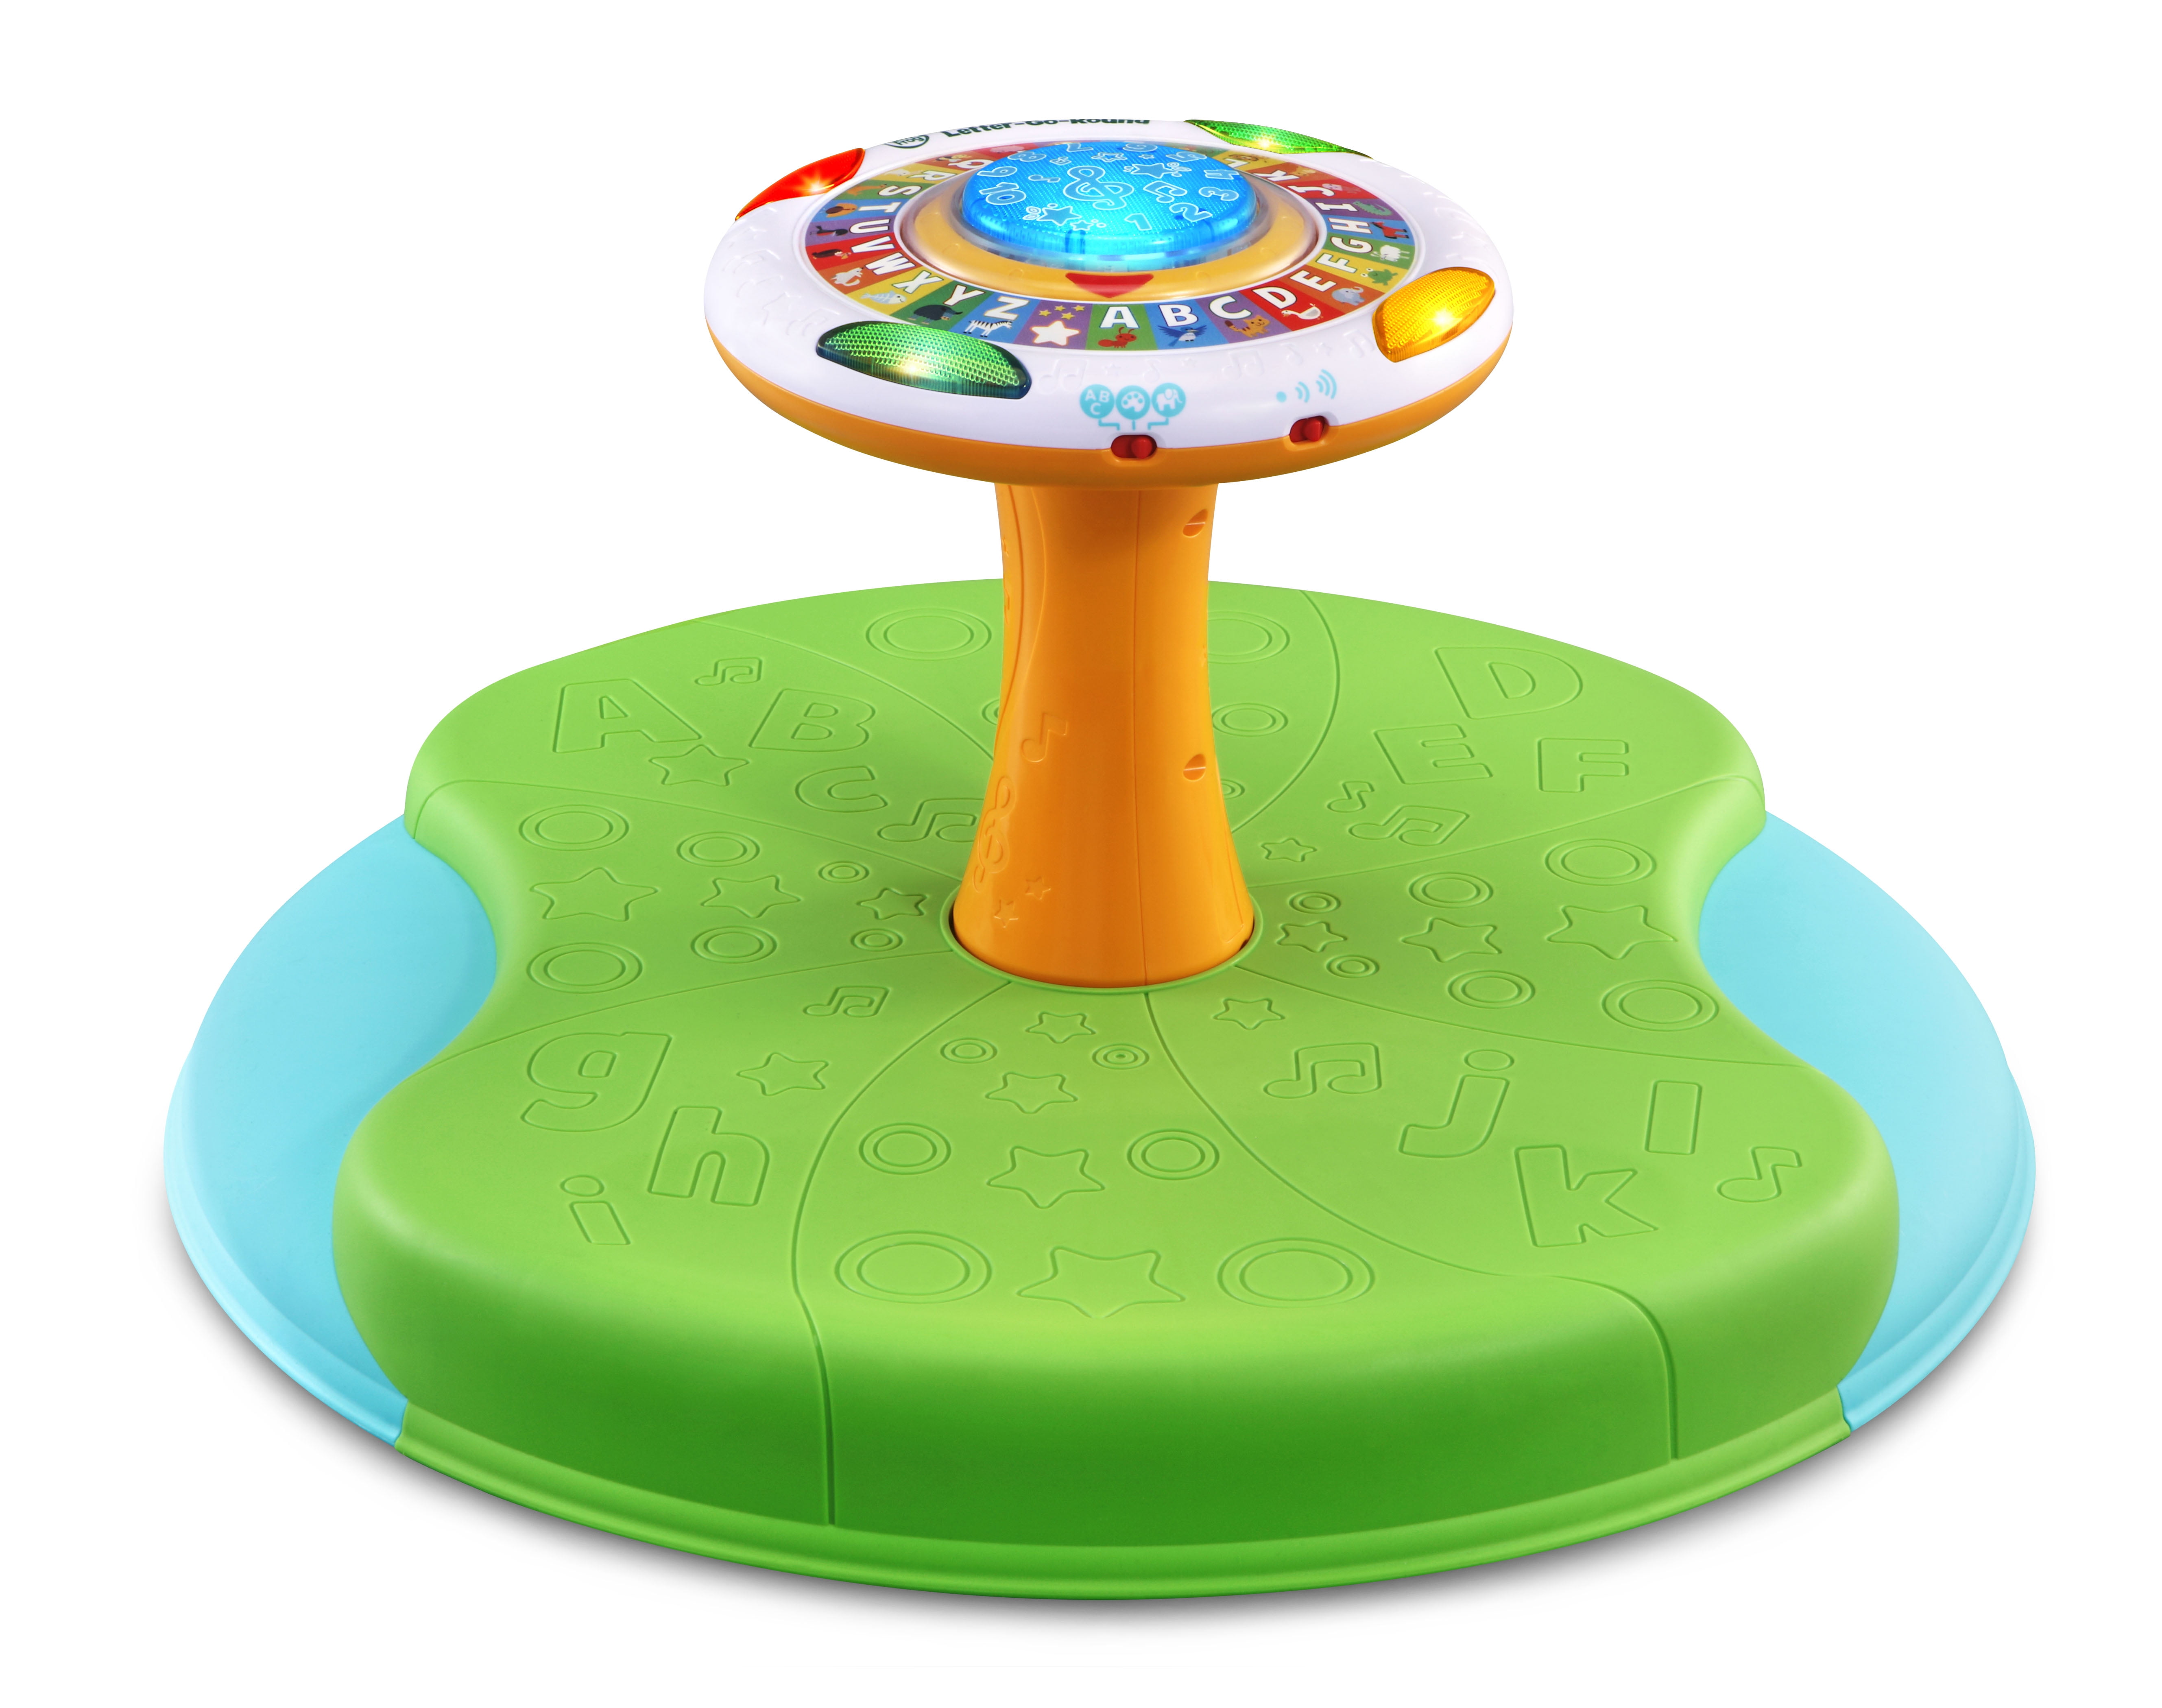 LeapFrog Letter-Go-Round Spin and Learn Toy